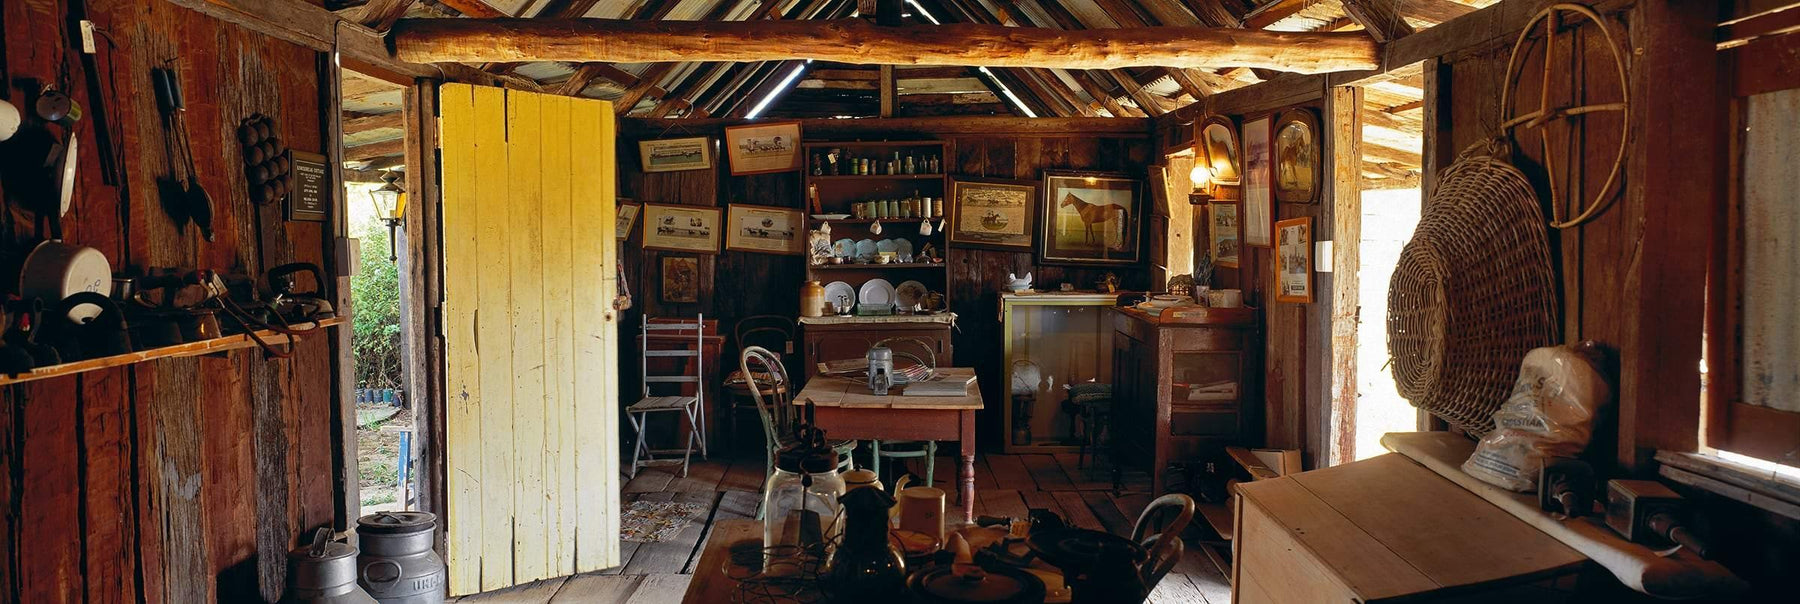 Interior of an old wooden shack filled with framed pictures table and chairs dishes and other miscellaneous items